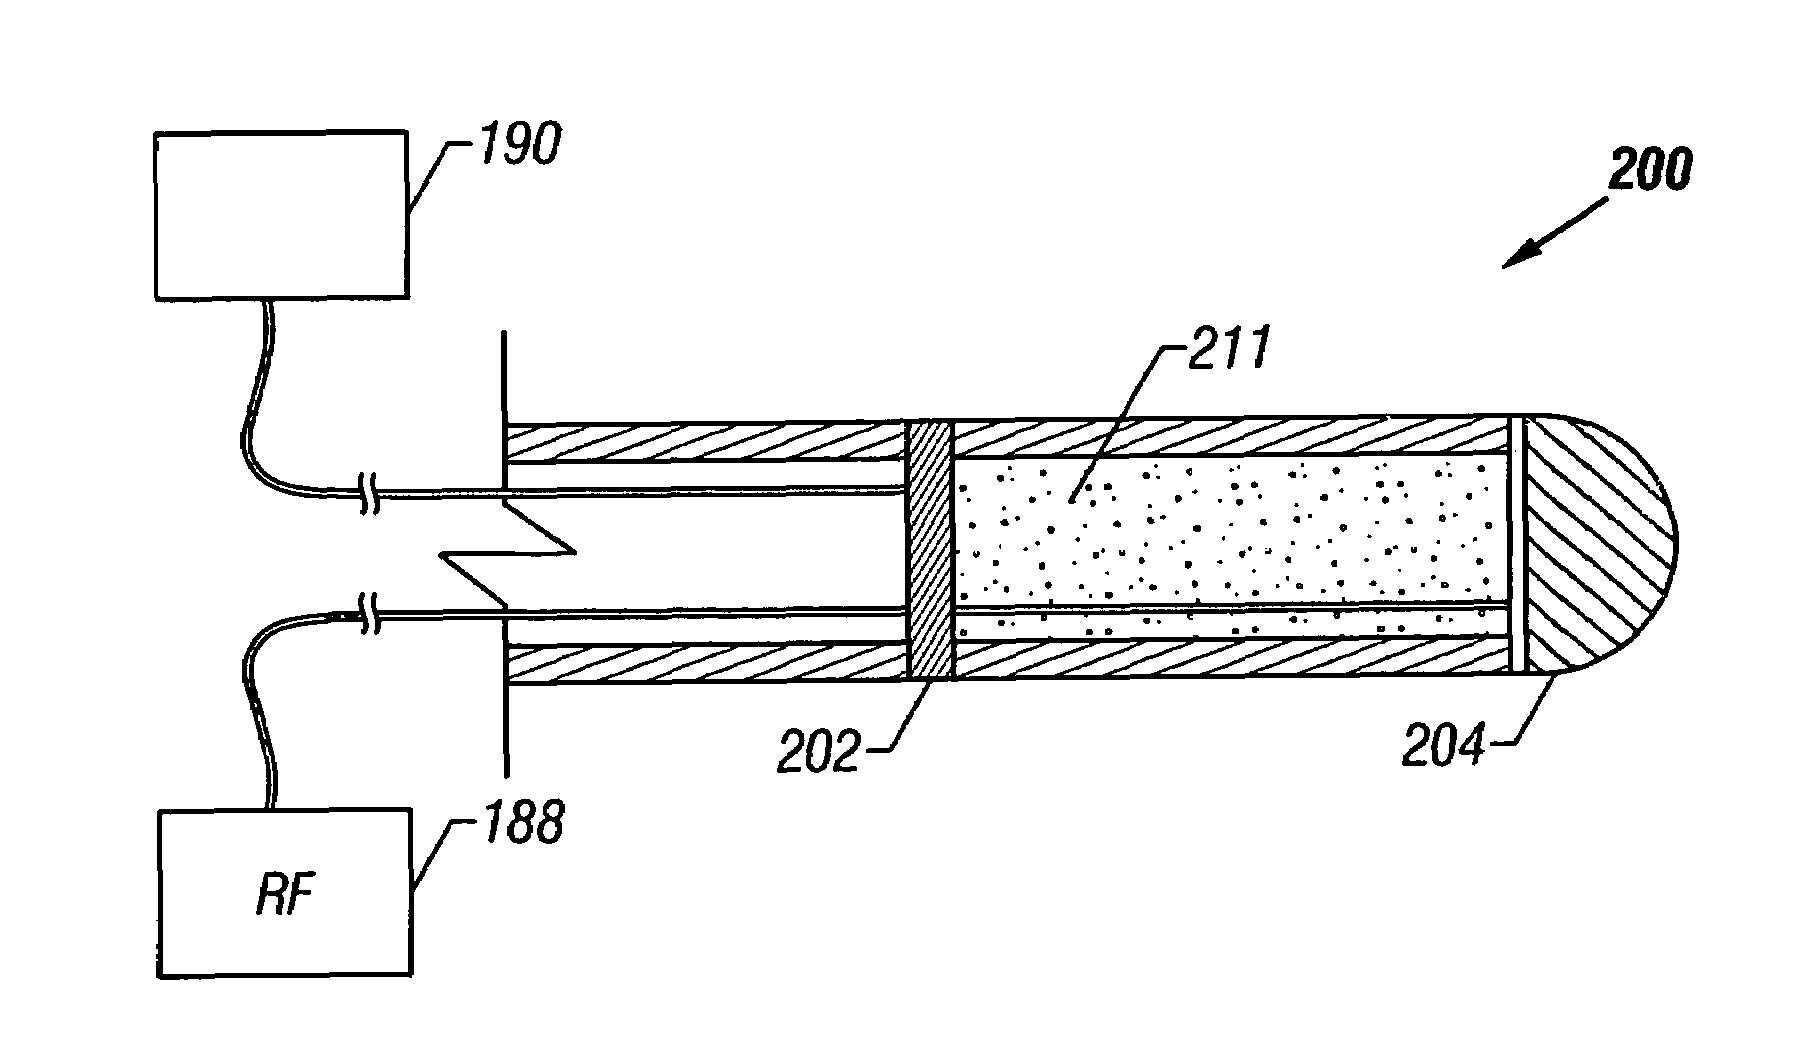 Multifunctional tip catheter for applying energy to tissue and detecting the presence of blood flow